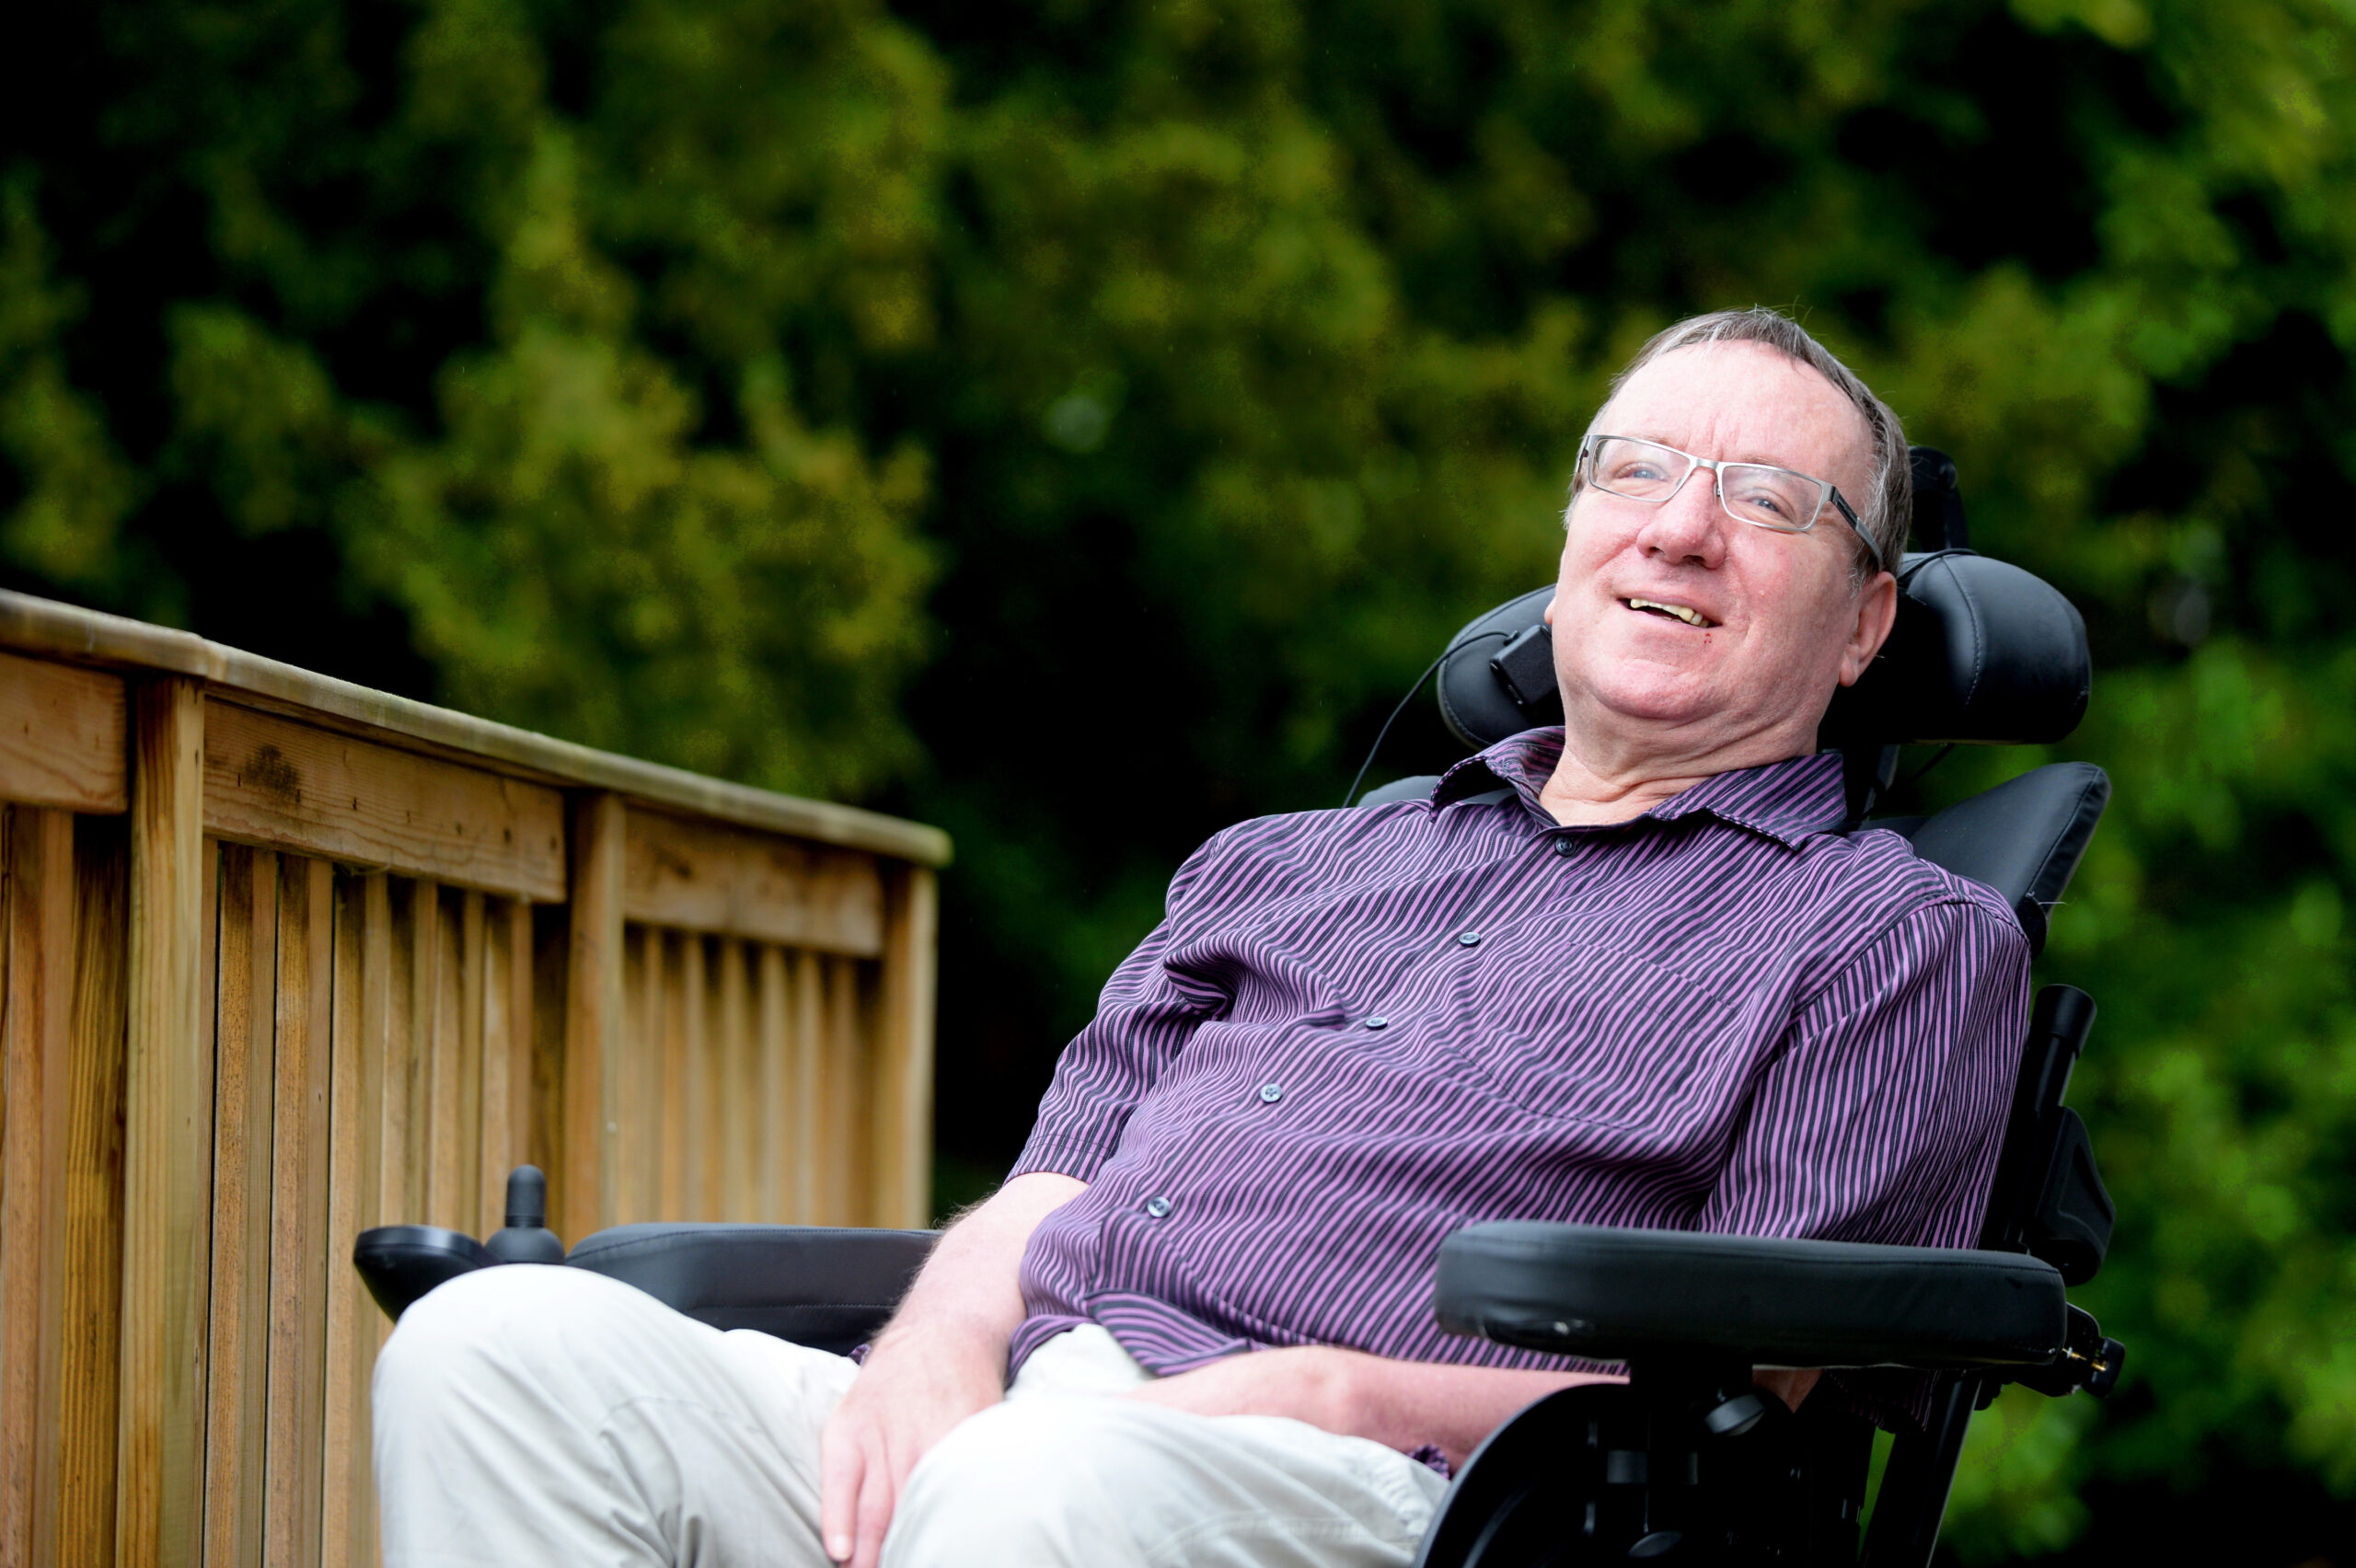 David Setters, who is living with MND